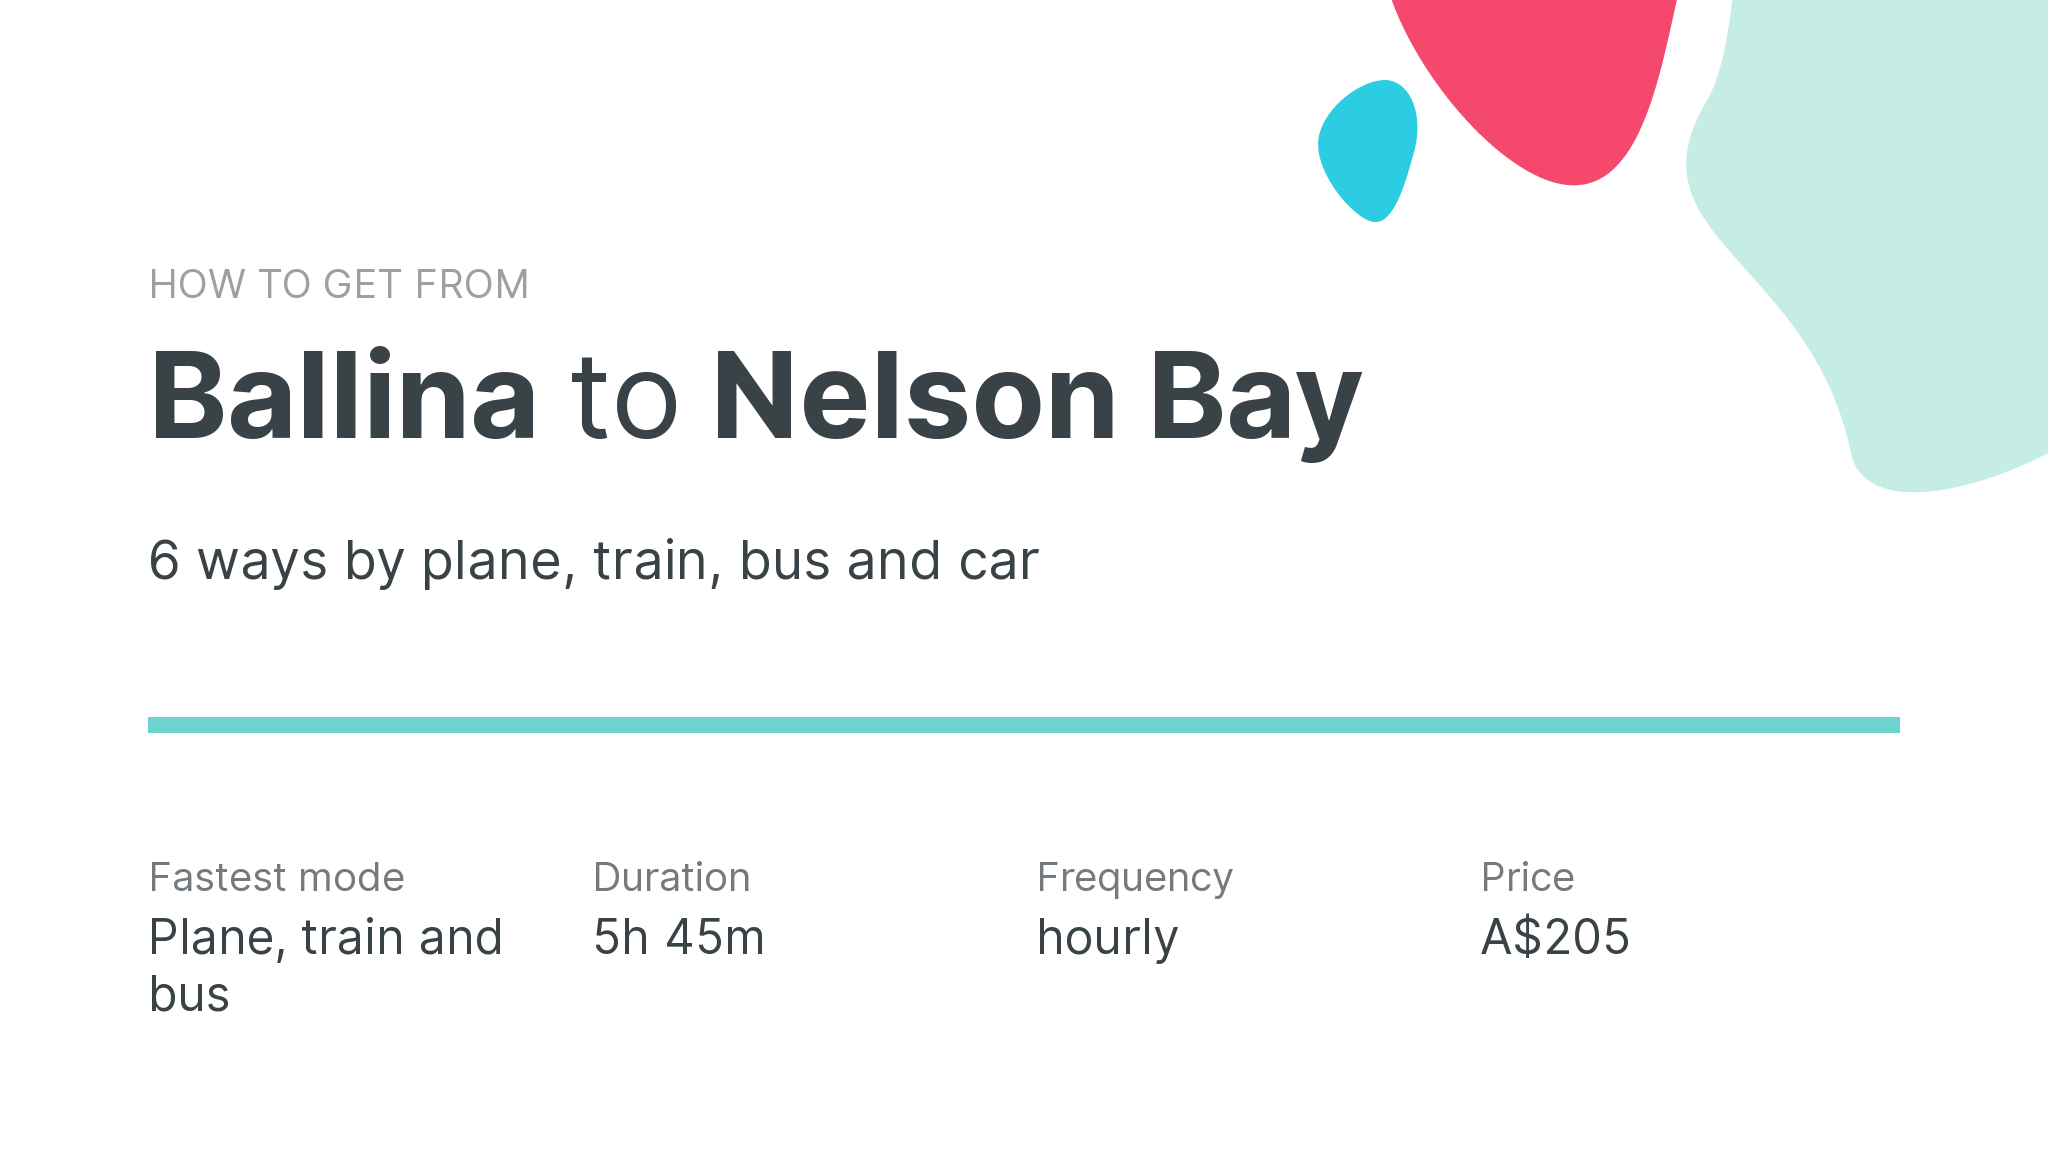 How do I get from Ballina to Nelson Bay